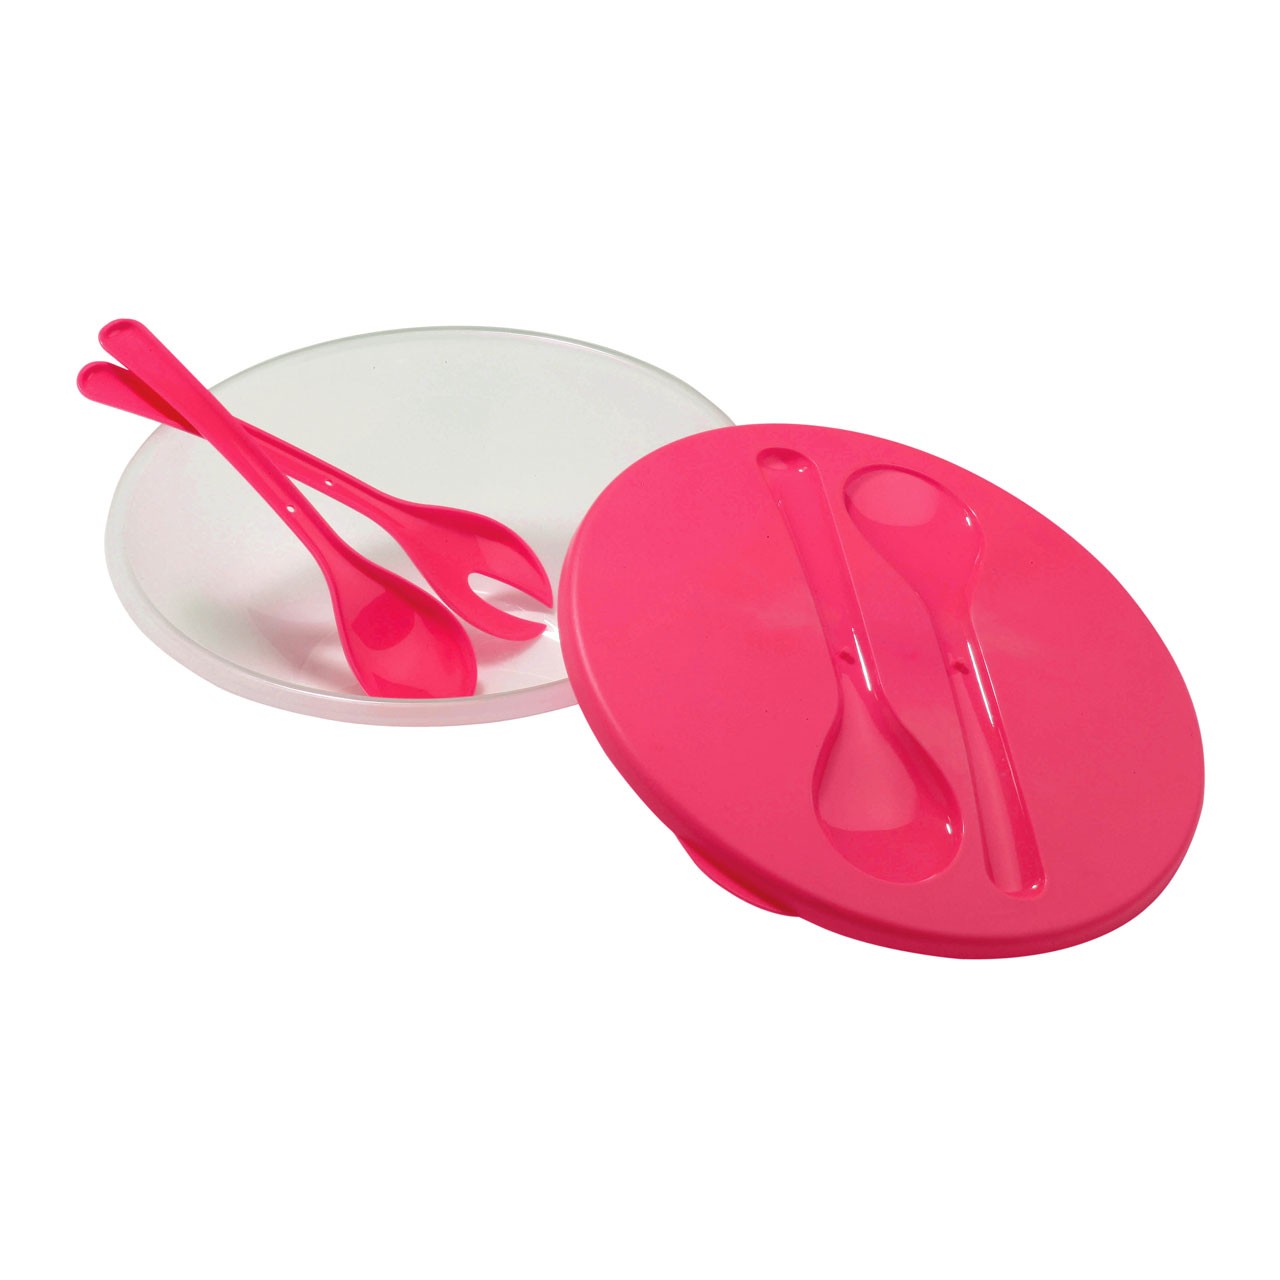 Round Salad Container with Spoon and Fork, Plastic Pink Lid